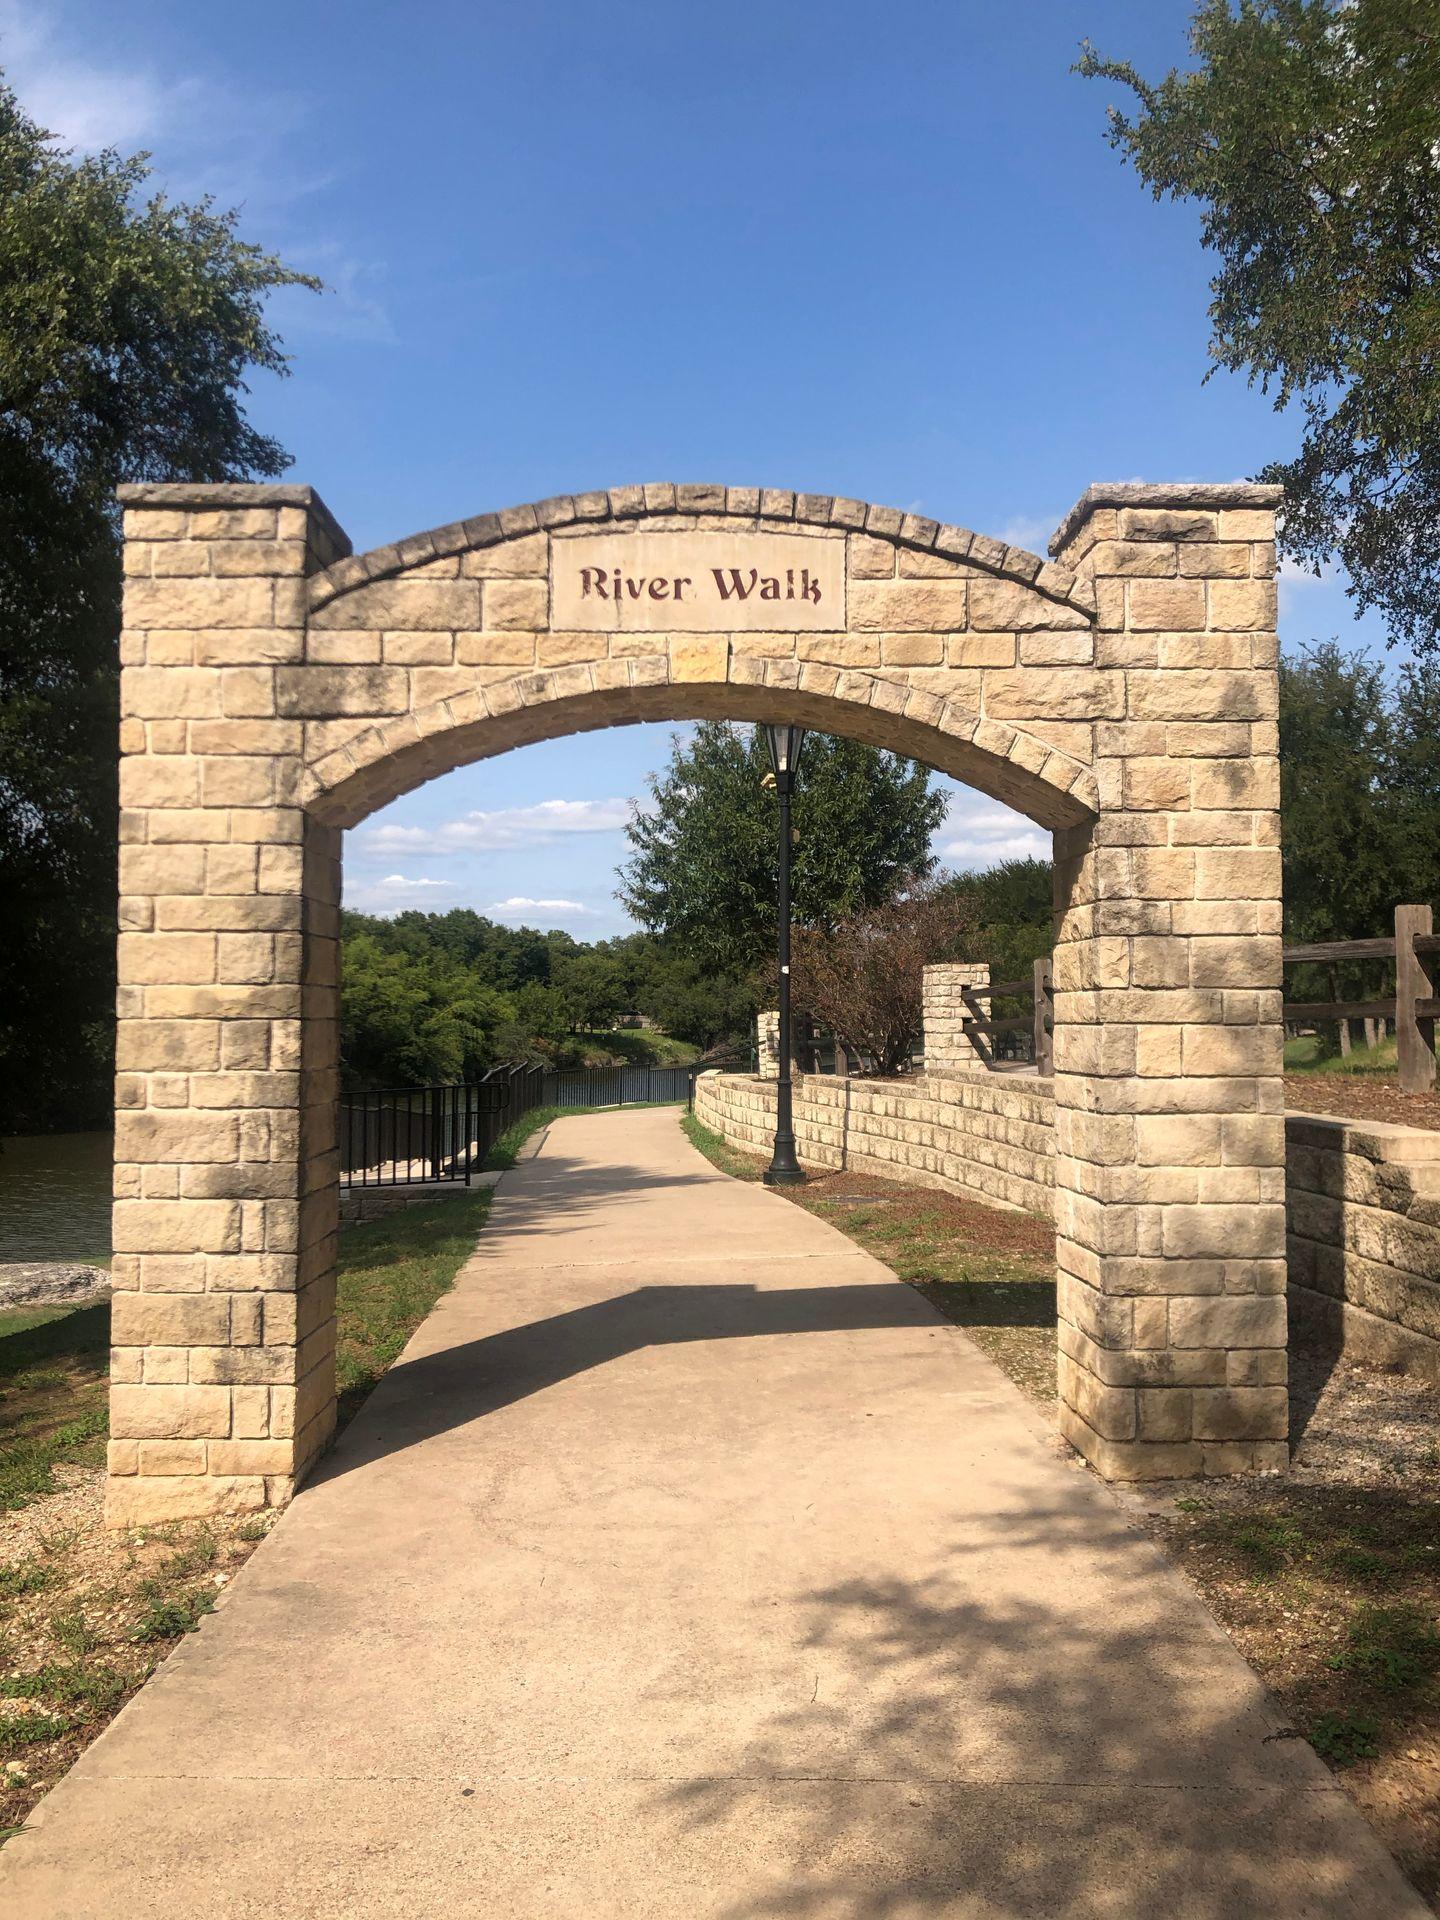 An archway labeled 'riverwalk' over a pathway.